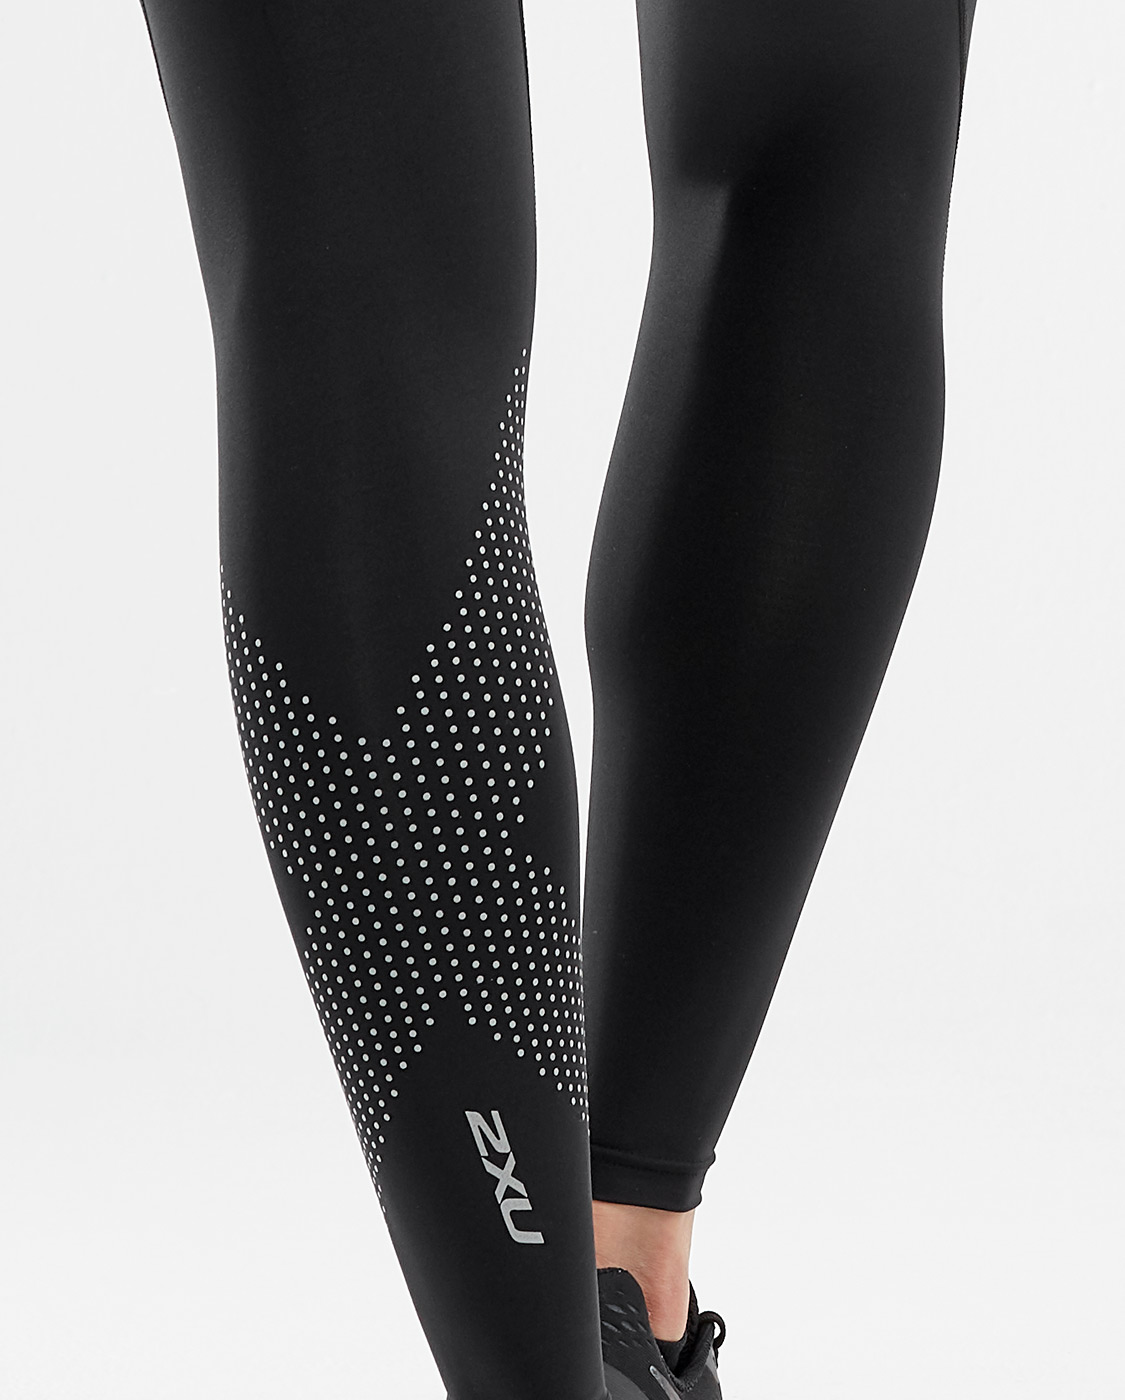  2XU Woman's MOTION MID RISE COMPRESSION TIGHT Black/Dotted Reflective